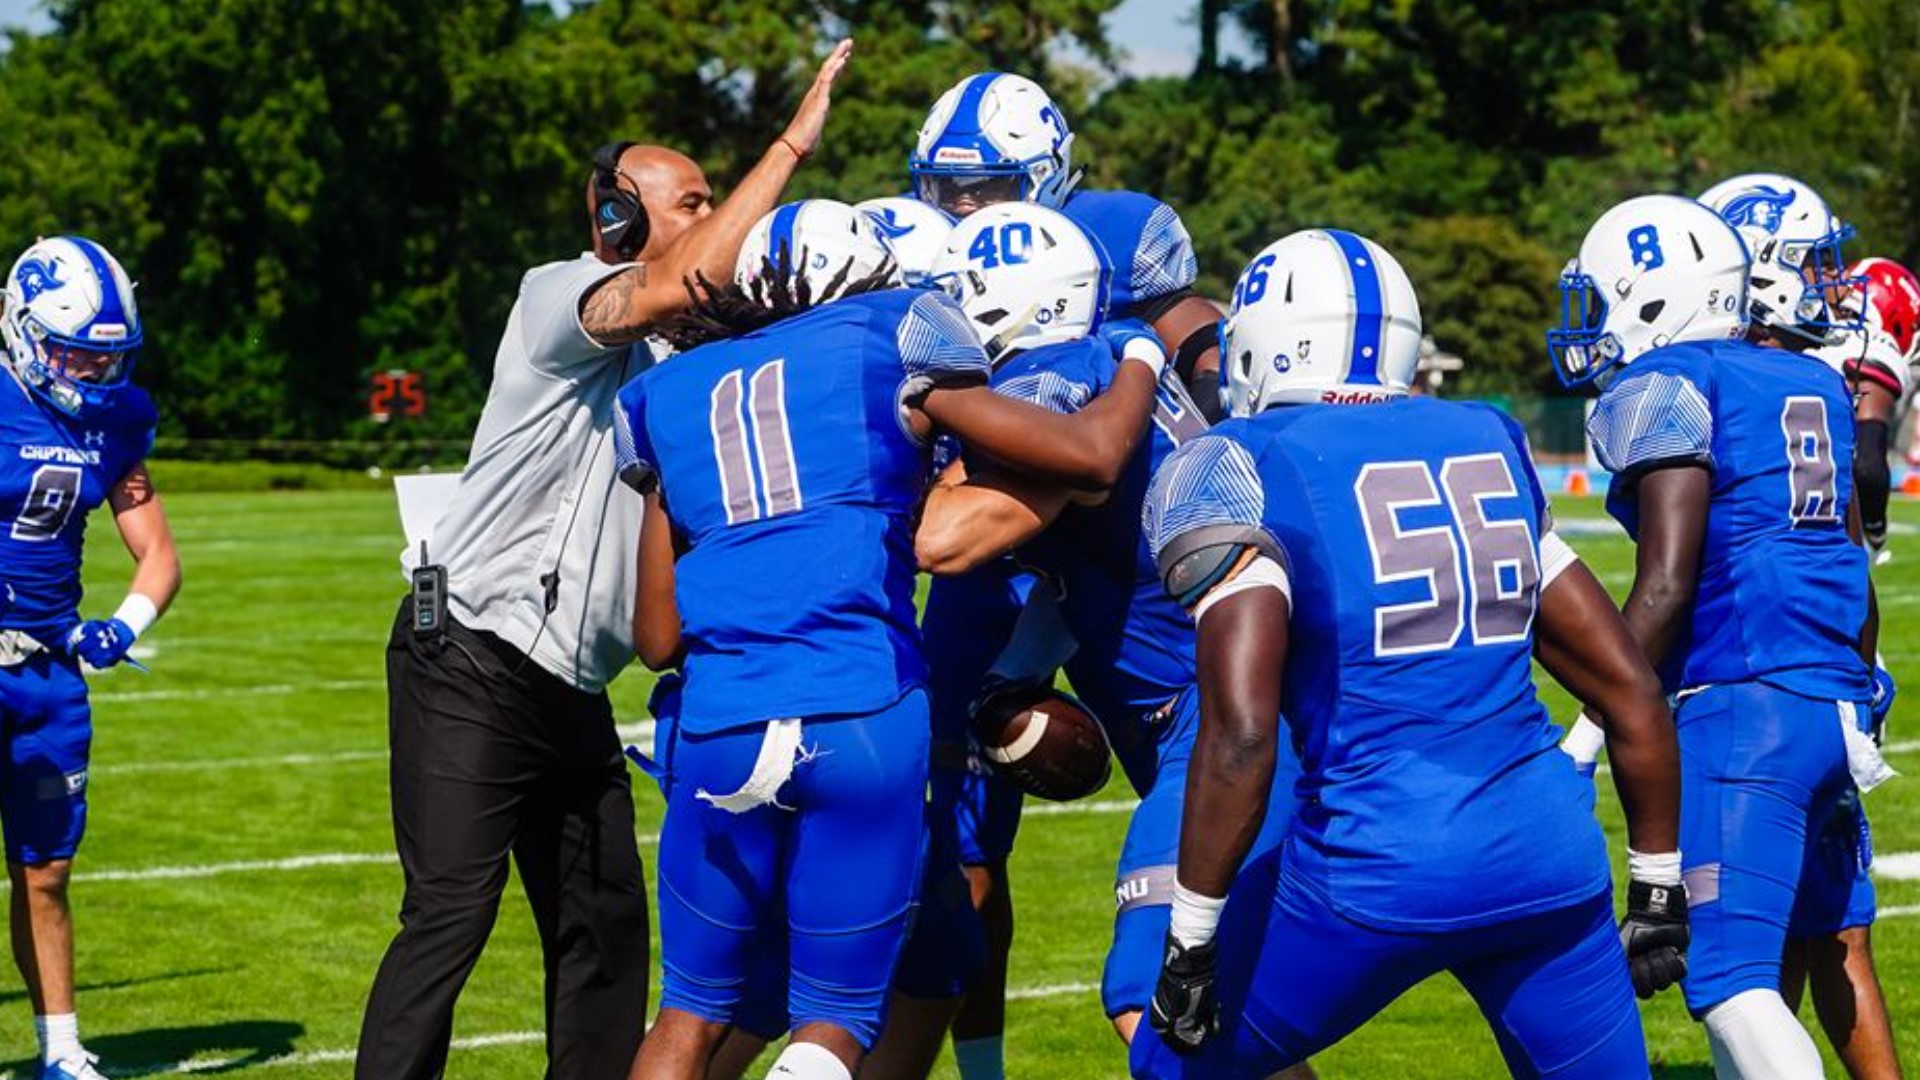 Christopher Newport's defense held the Red Hawks to just 160 total yards.